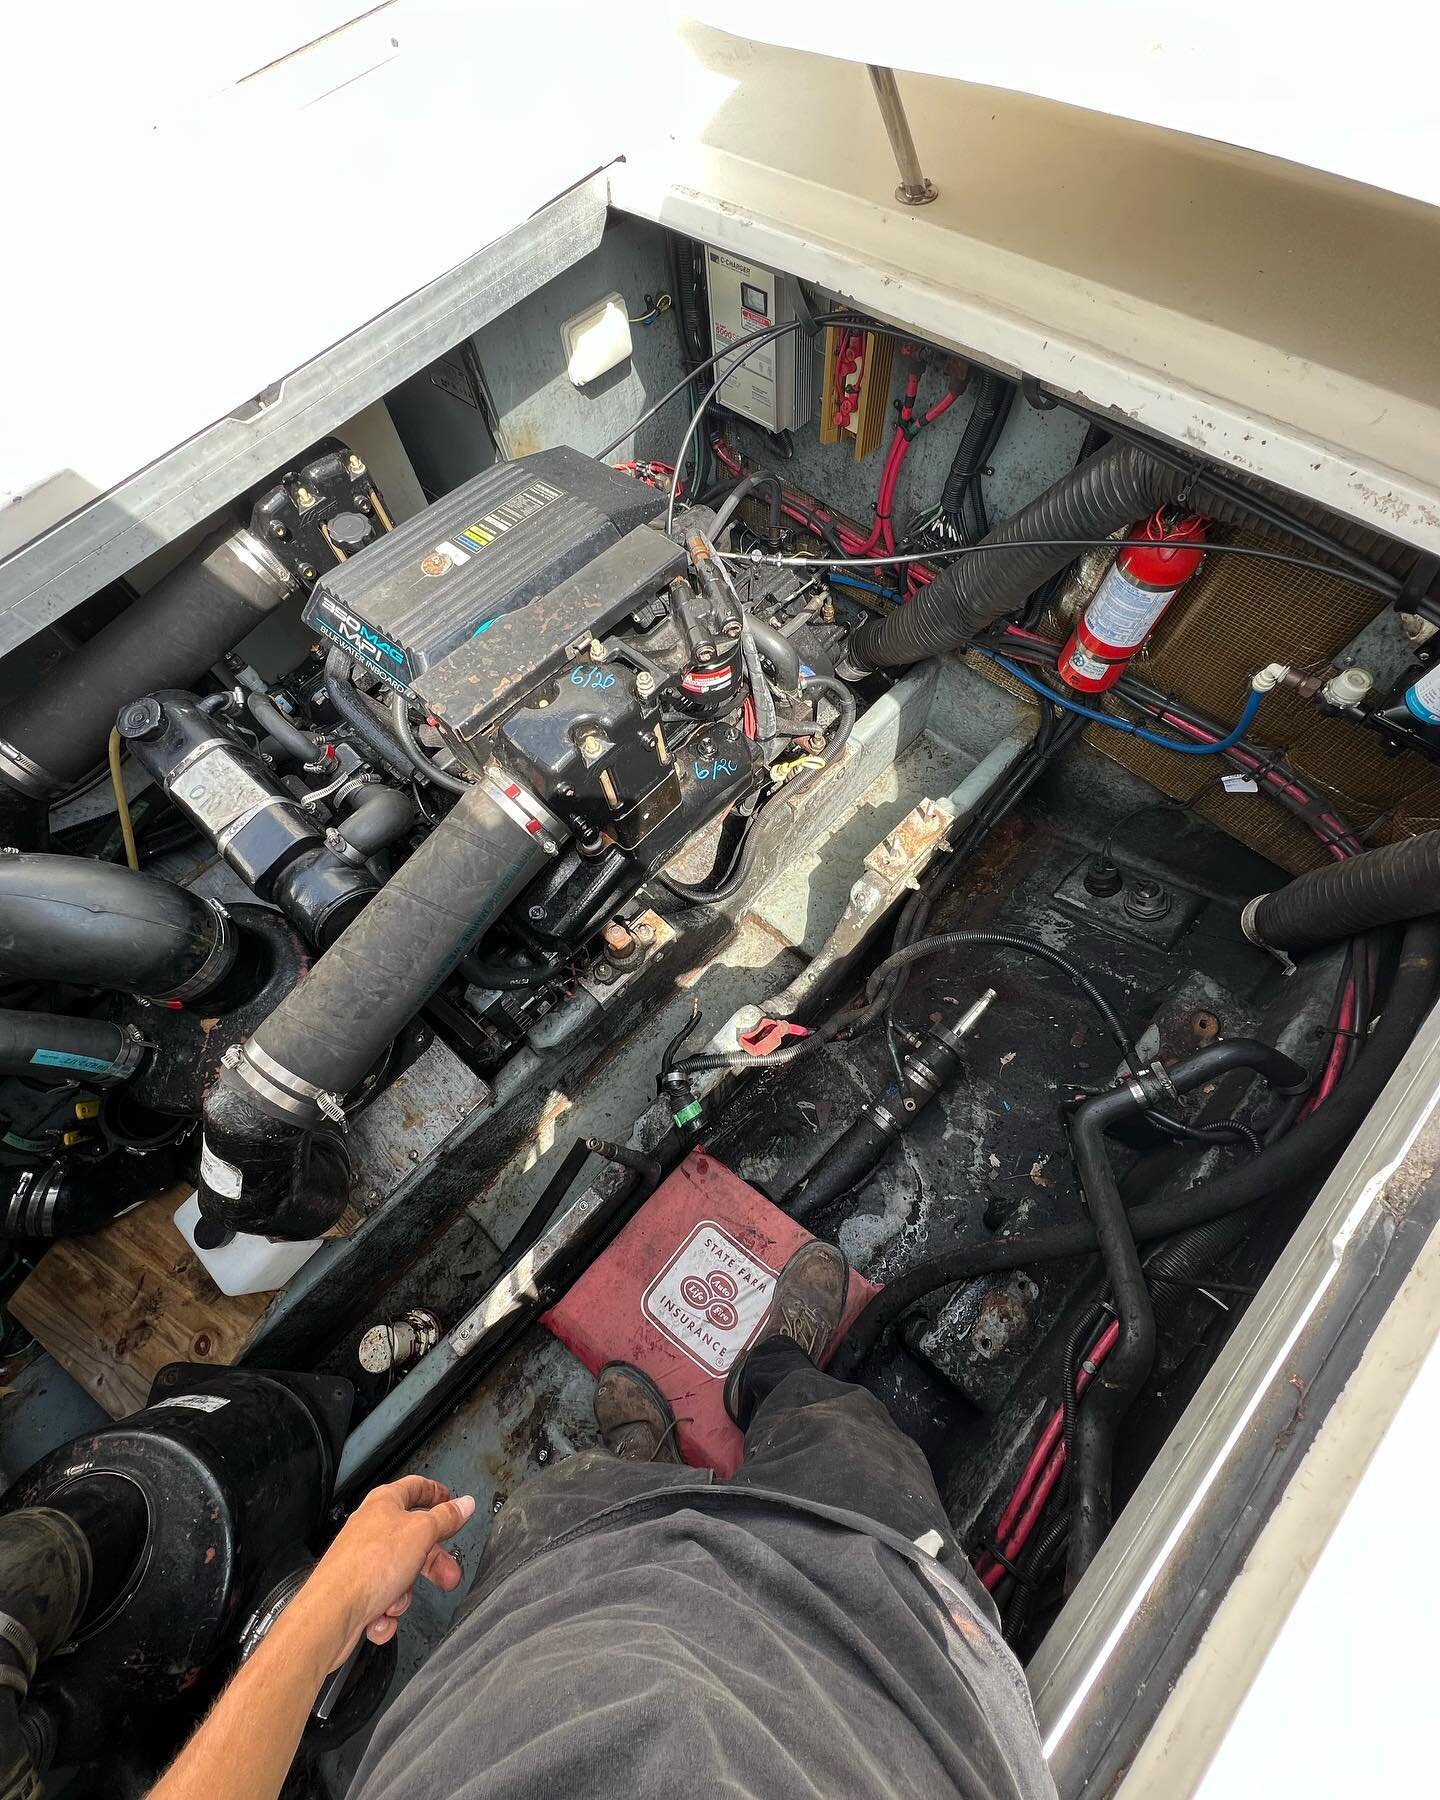 One of the most important things we do during a repower is a MAJOR bilge cleaning. Most areas are virtually impossible to reach when both engines are in, so we take advantage of the extra room.

Contact us today for an estimate on an outboard, sternd